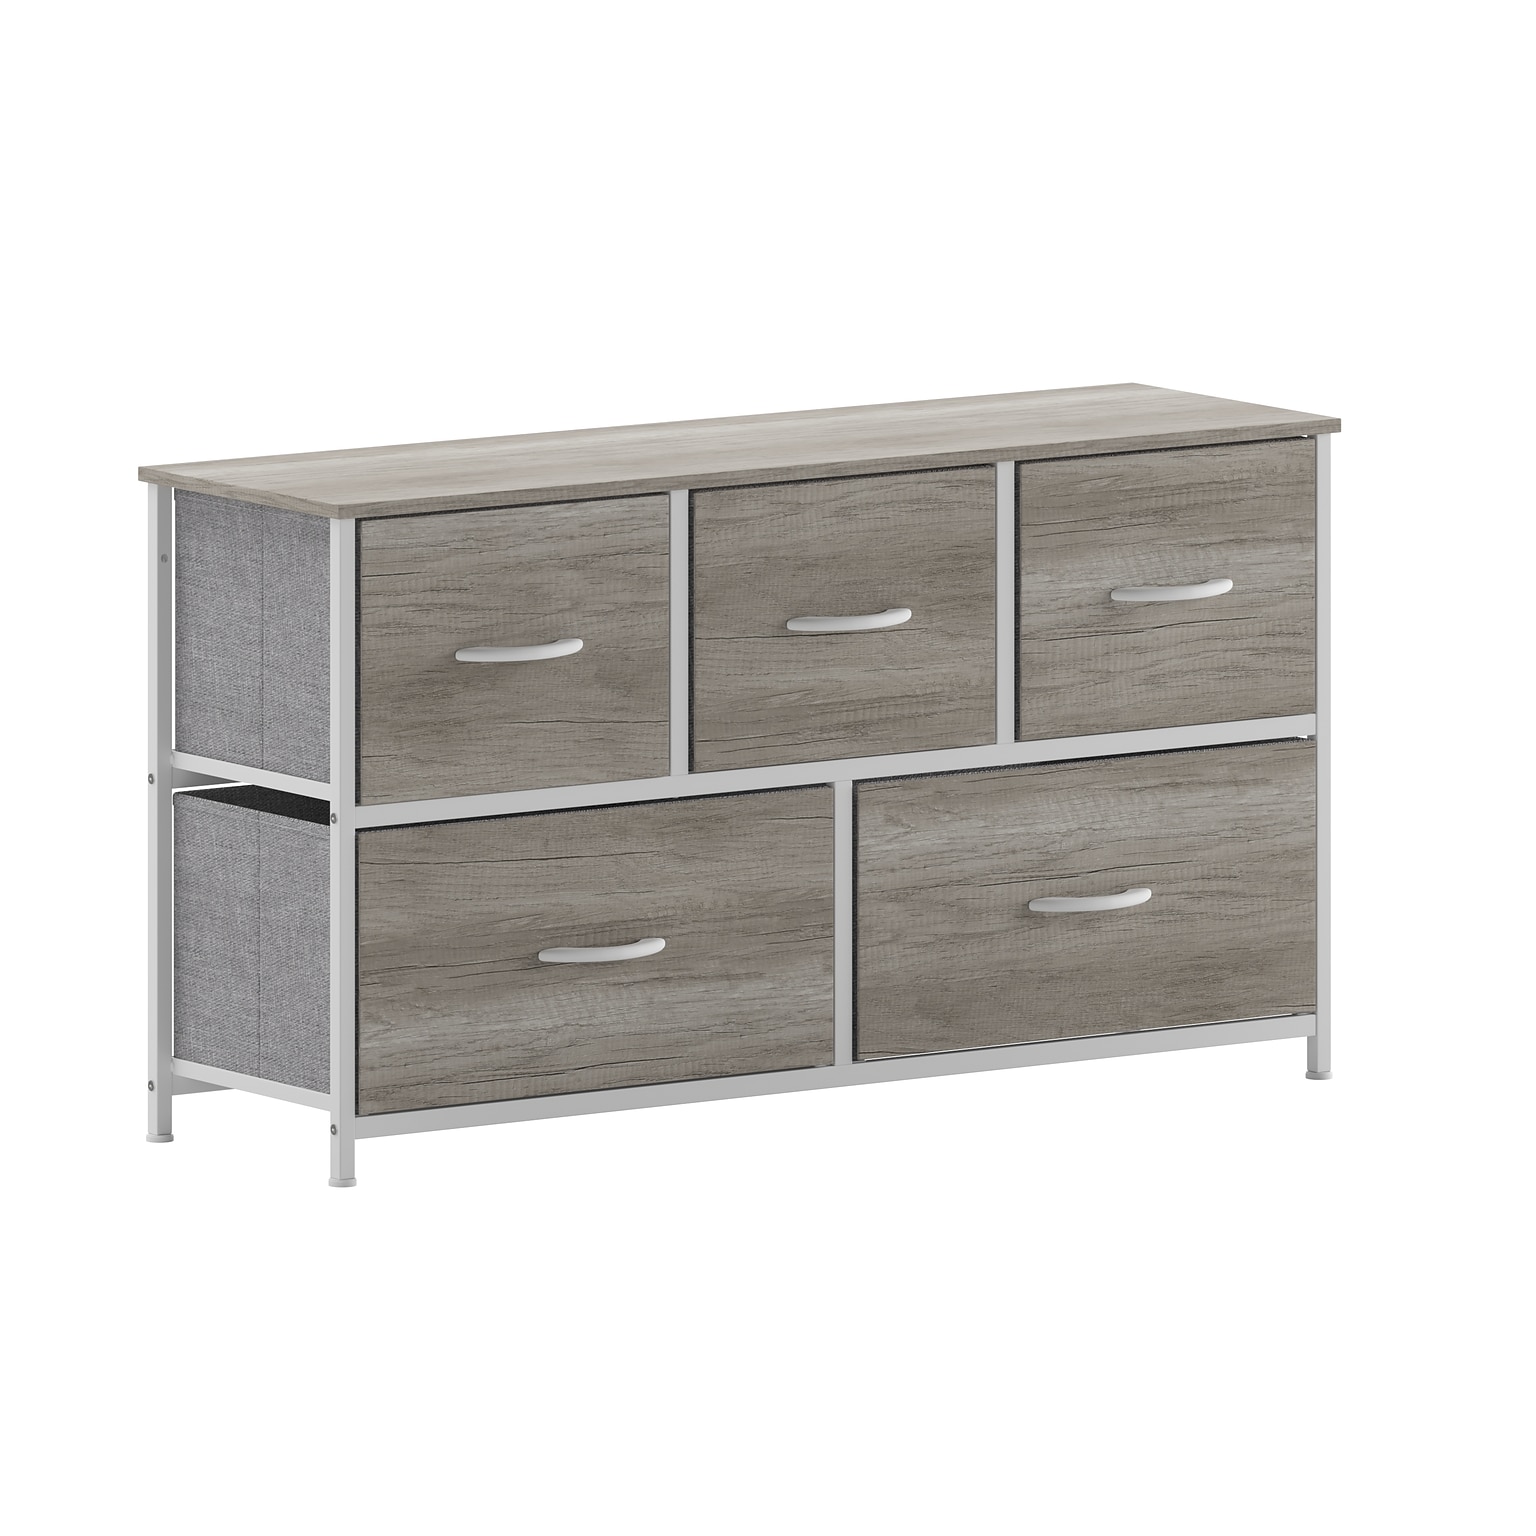 Flash Furniture Harris 5 Drawers Storage Dresser with Engineered Wood Drawers, White/Light Natural (WX5L206MDFWTLNT)